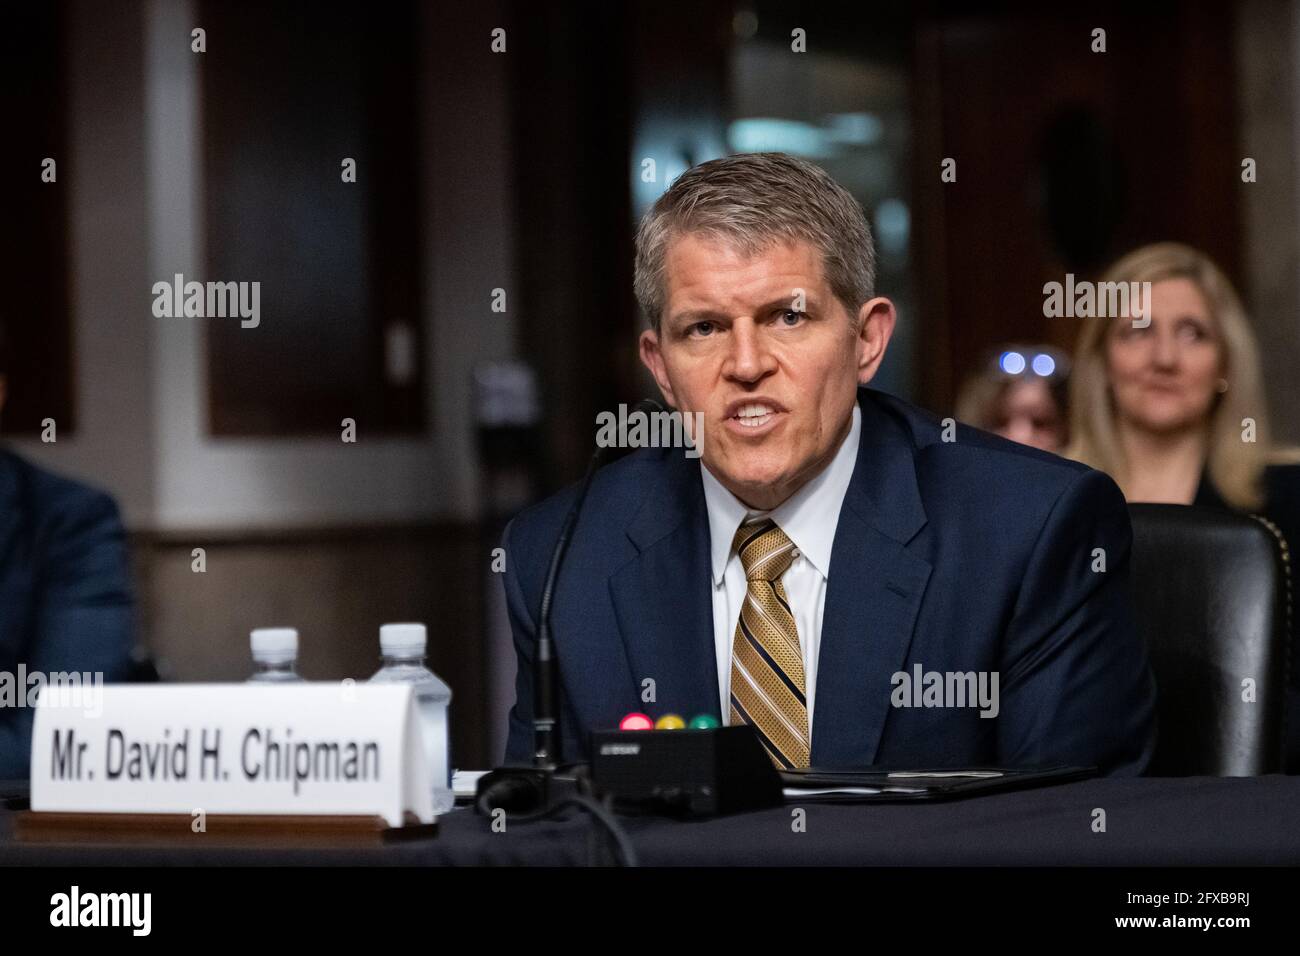 Washington, USA. 26th May, 2021. David Chipman, President Biden's nominee for Director of the Bureau of Alcohol, Tobacco, Firearms, and Explosives (ATF), testifies during a Senate Judiciary Committee confirmation hearing, at the U.S. Capitol, in Washington, DC, on Wednesday, May 26, 2021. The Senate Judiciary Committee heard testimony from multiple law enforcement agency nominations, including top level DEA and ATF nominees, and other Judicial and Department of Justice nominees. (Graeme Sloan/Sipa USA) Credit: Sipa USA/Alamy Live News Stock Photo